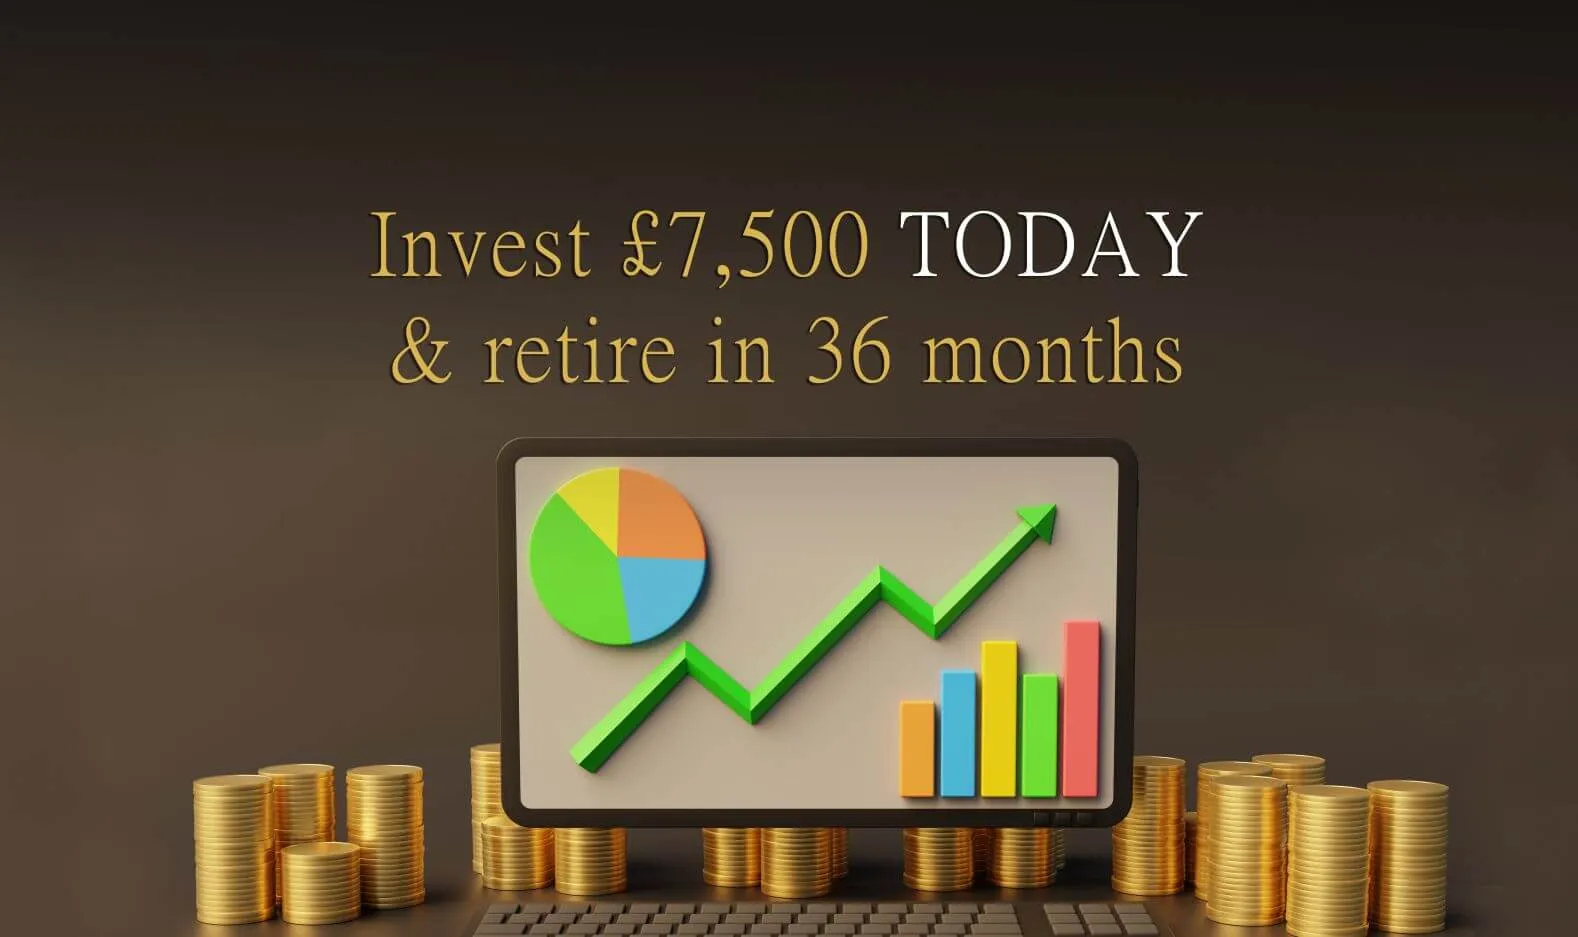 Invest £7,500 in Serviced Accommodation & Retire in 36 Months